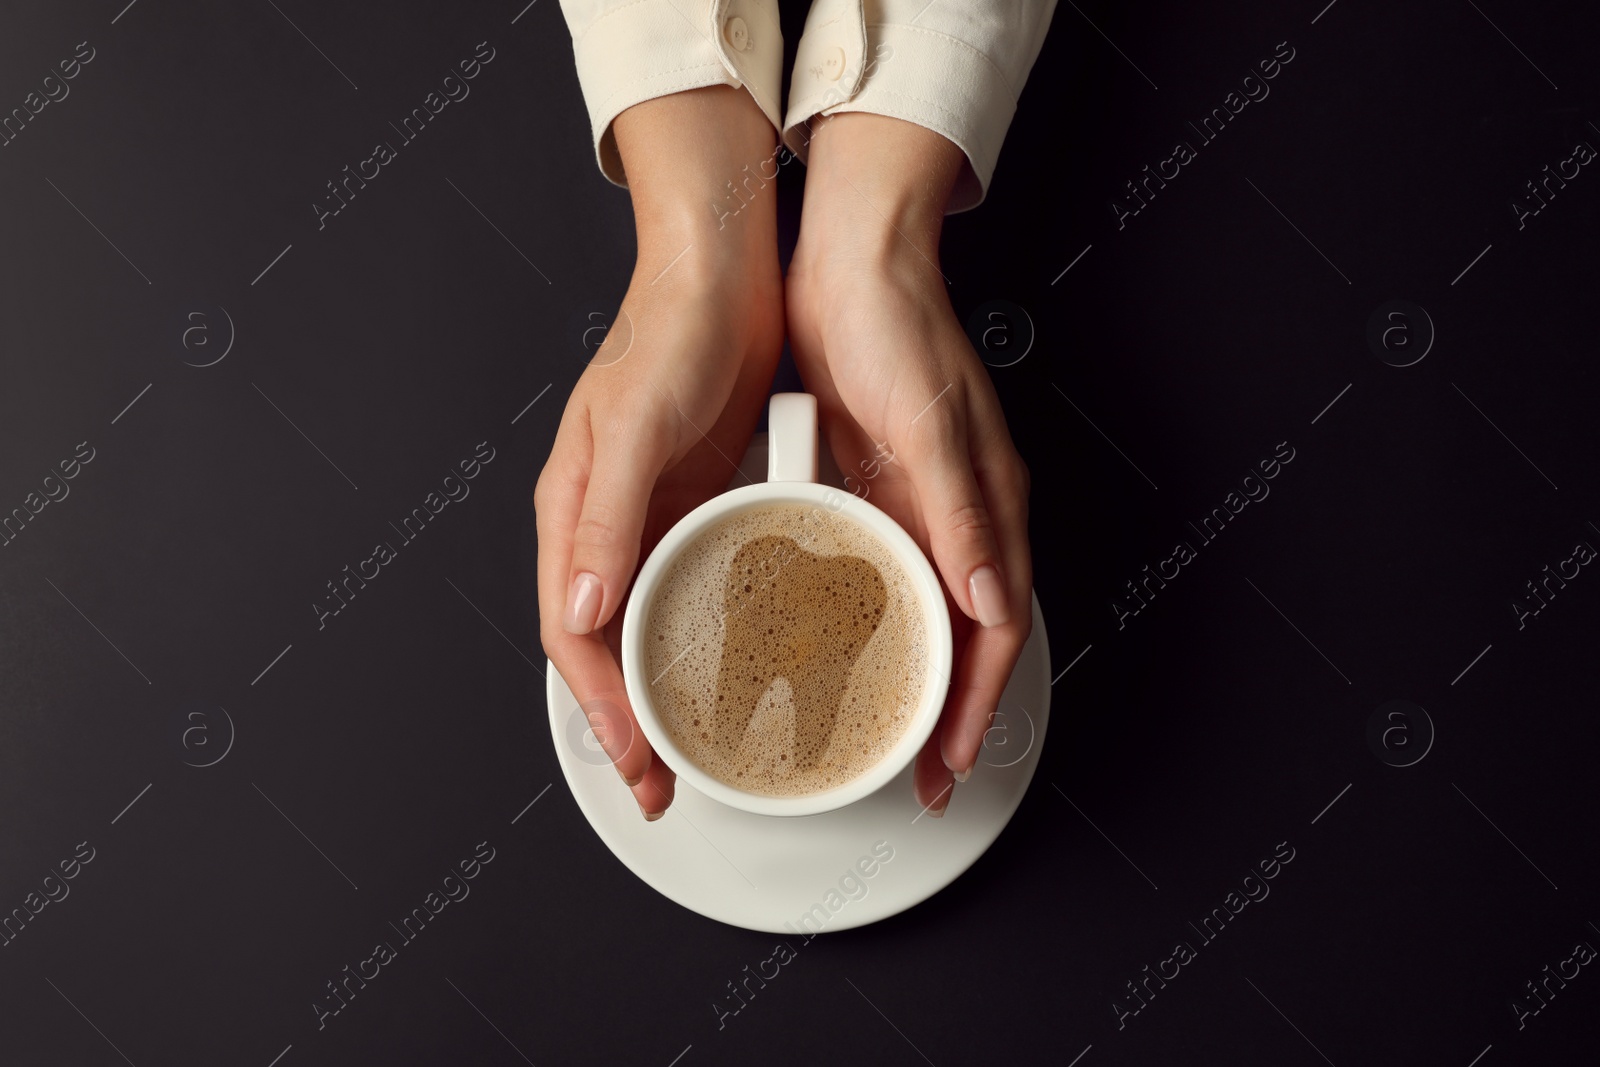 Image of Coffee causing dental problem. Woman with cup of hot drink on black background, top view